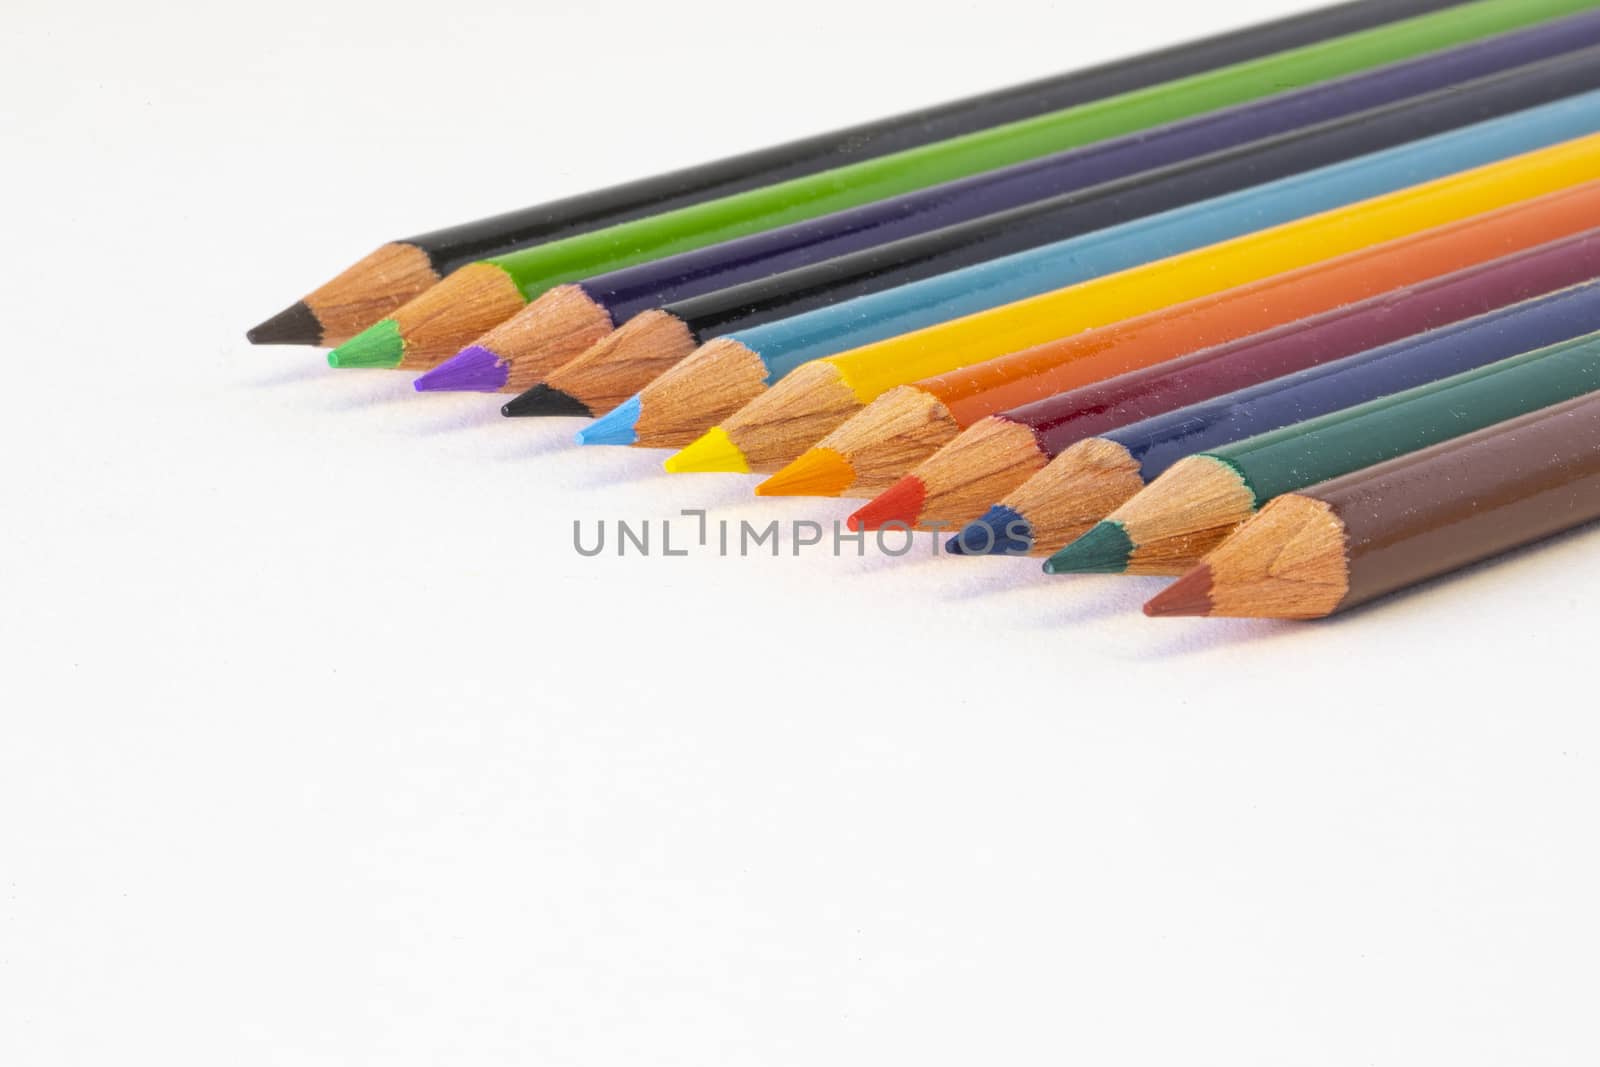 A group of colored pencils on white background, all in focus.